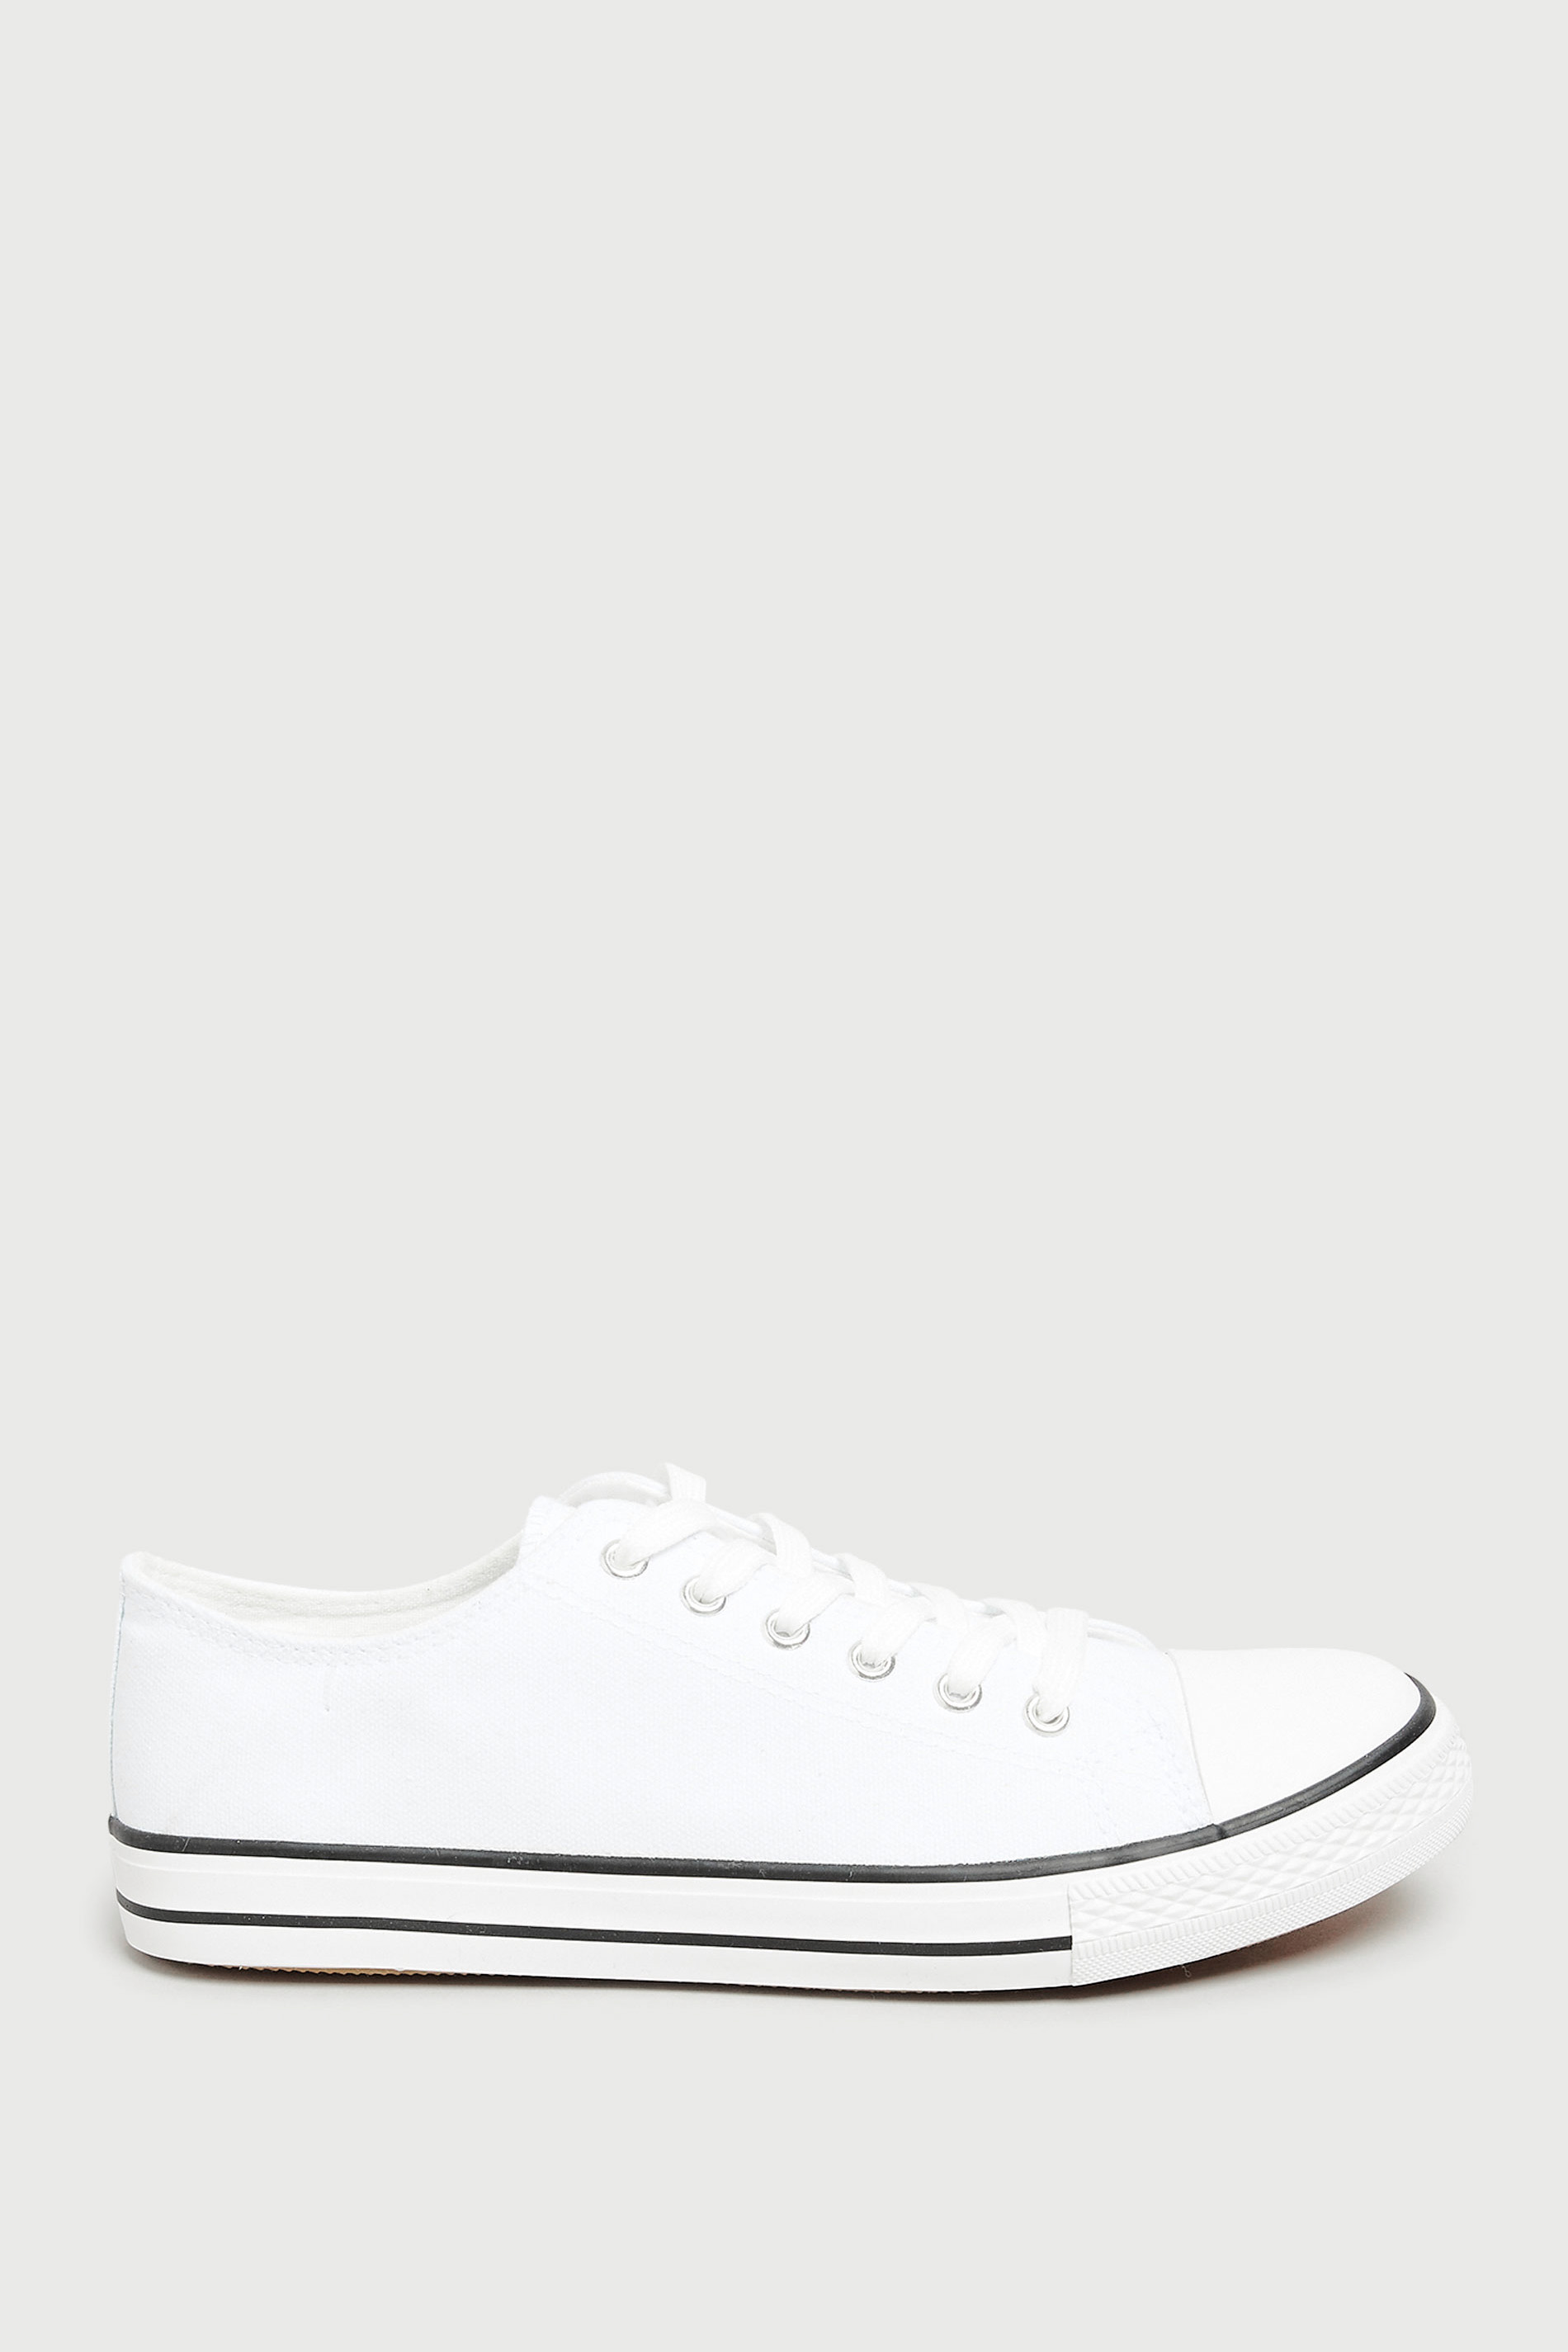 LTS Tall Women's White Canvas Low Trainers | Long Tall Sally  3